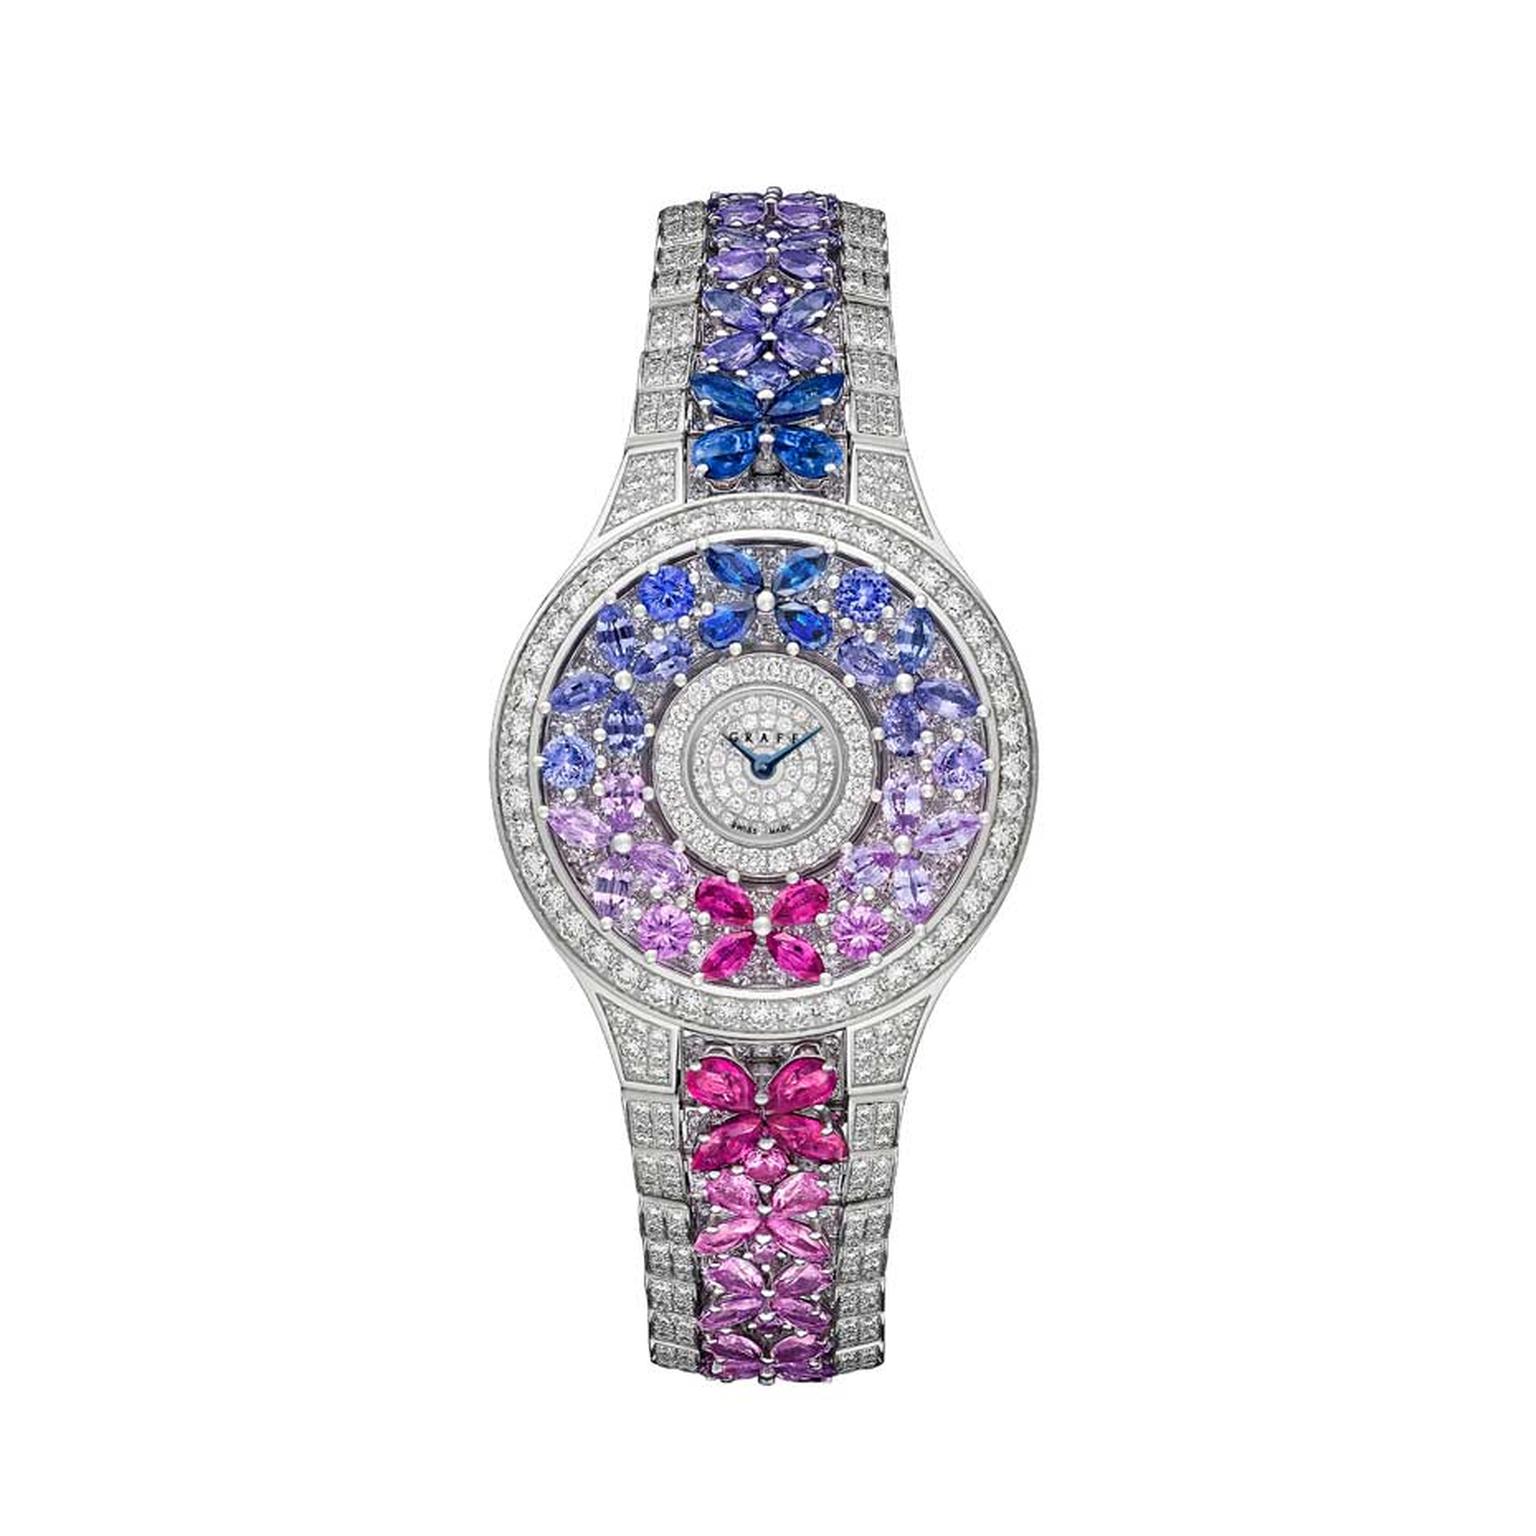 Graff Multi-Coloured Butterfly watch with diamonds, sapphires and rubies.